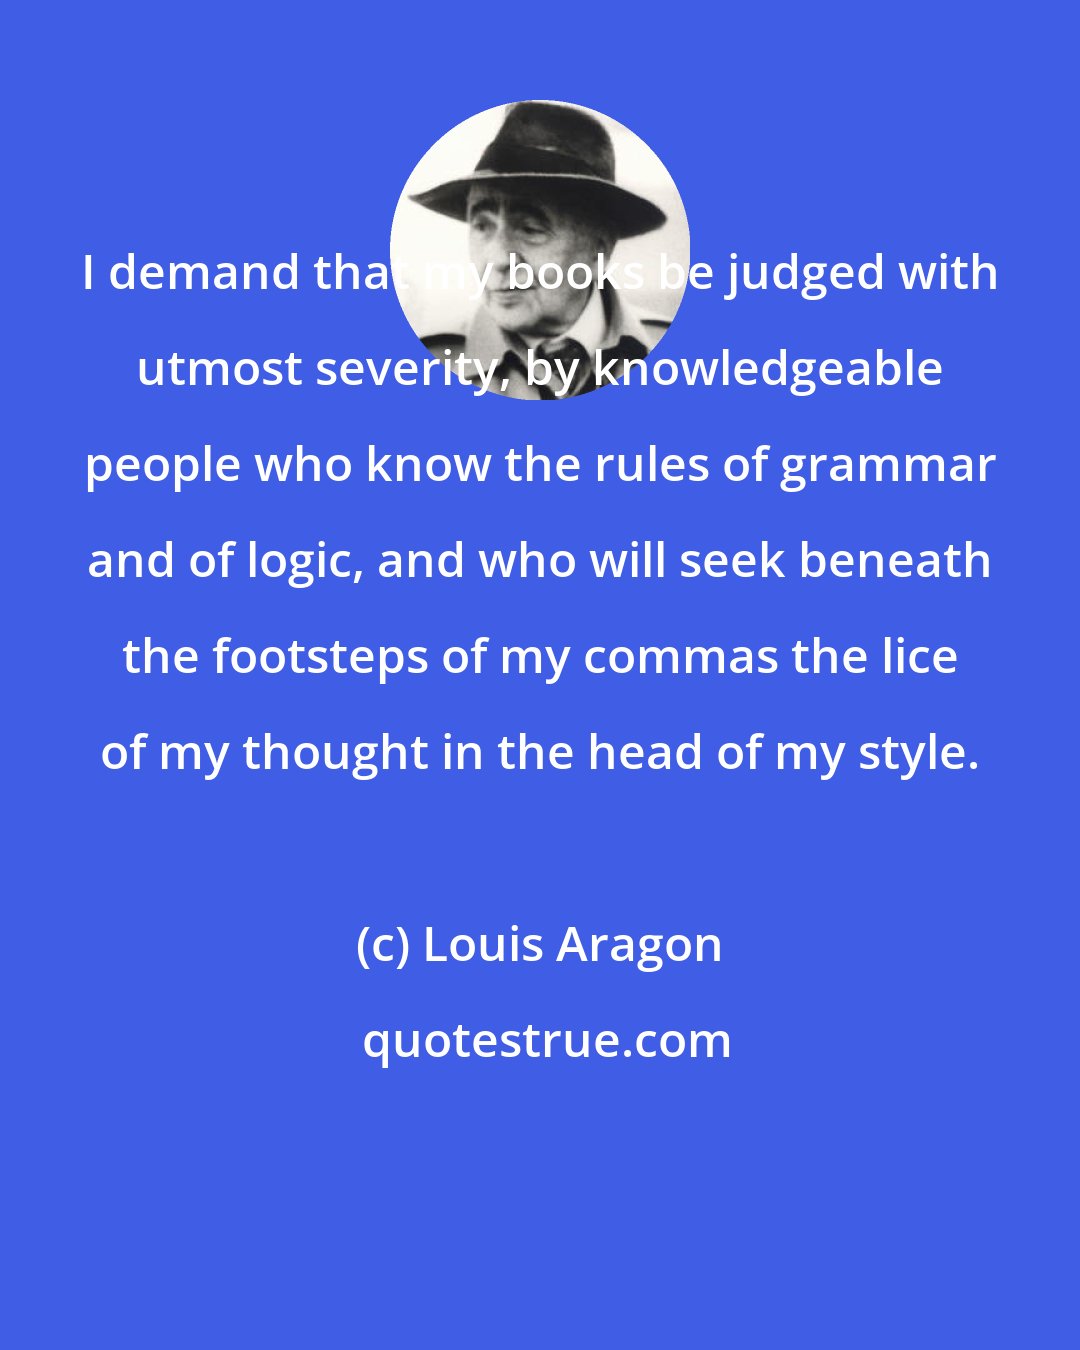 Louis Aragon: I demand that my books be judged with utmost severity, by knowledgeable people who know the rules of grammar and of logic, and who will seek beneath the footsteps of my commas the lice of my thought in the head of my style.